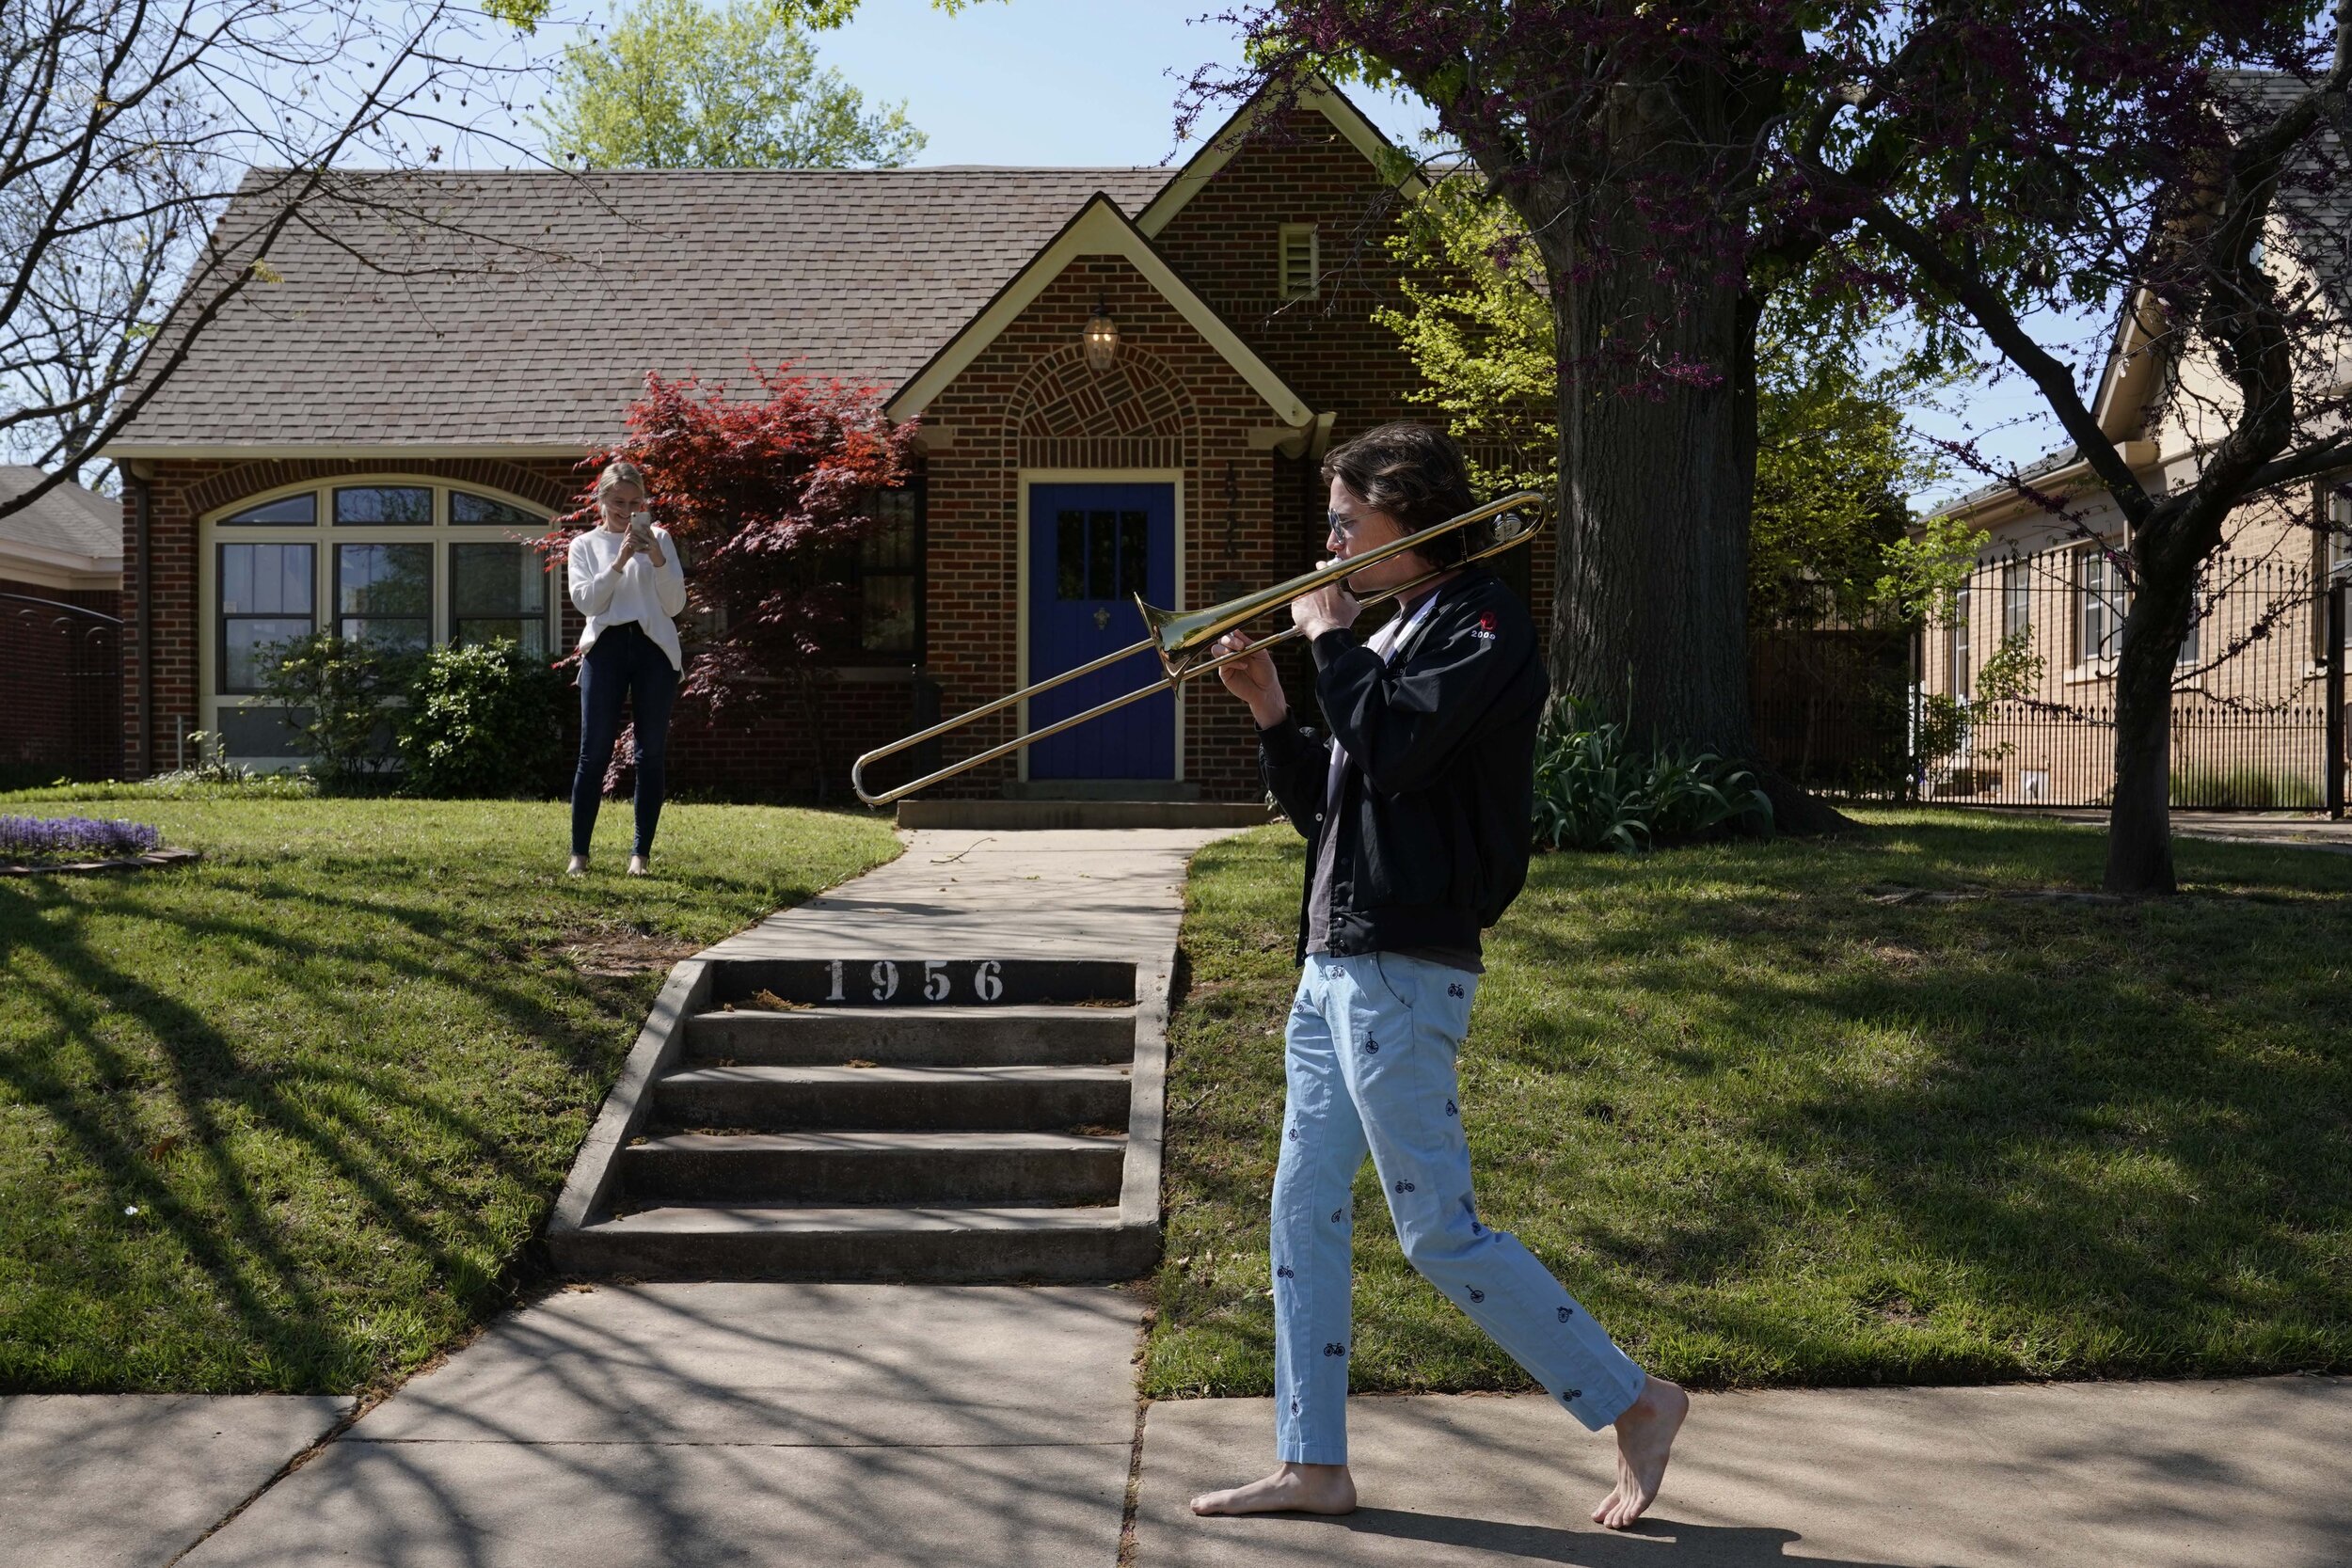  A woman takes a video of Christian Pearson as he plays the trombone during his morning walk amidst an outbreak of the coronavirus disease (COVID-19) in Oklahoma City, Oklahoma, U.S. April 10, 2020. REUTERS/Nick Oxford 